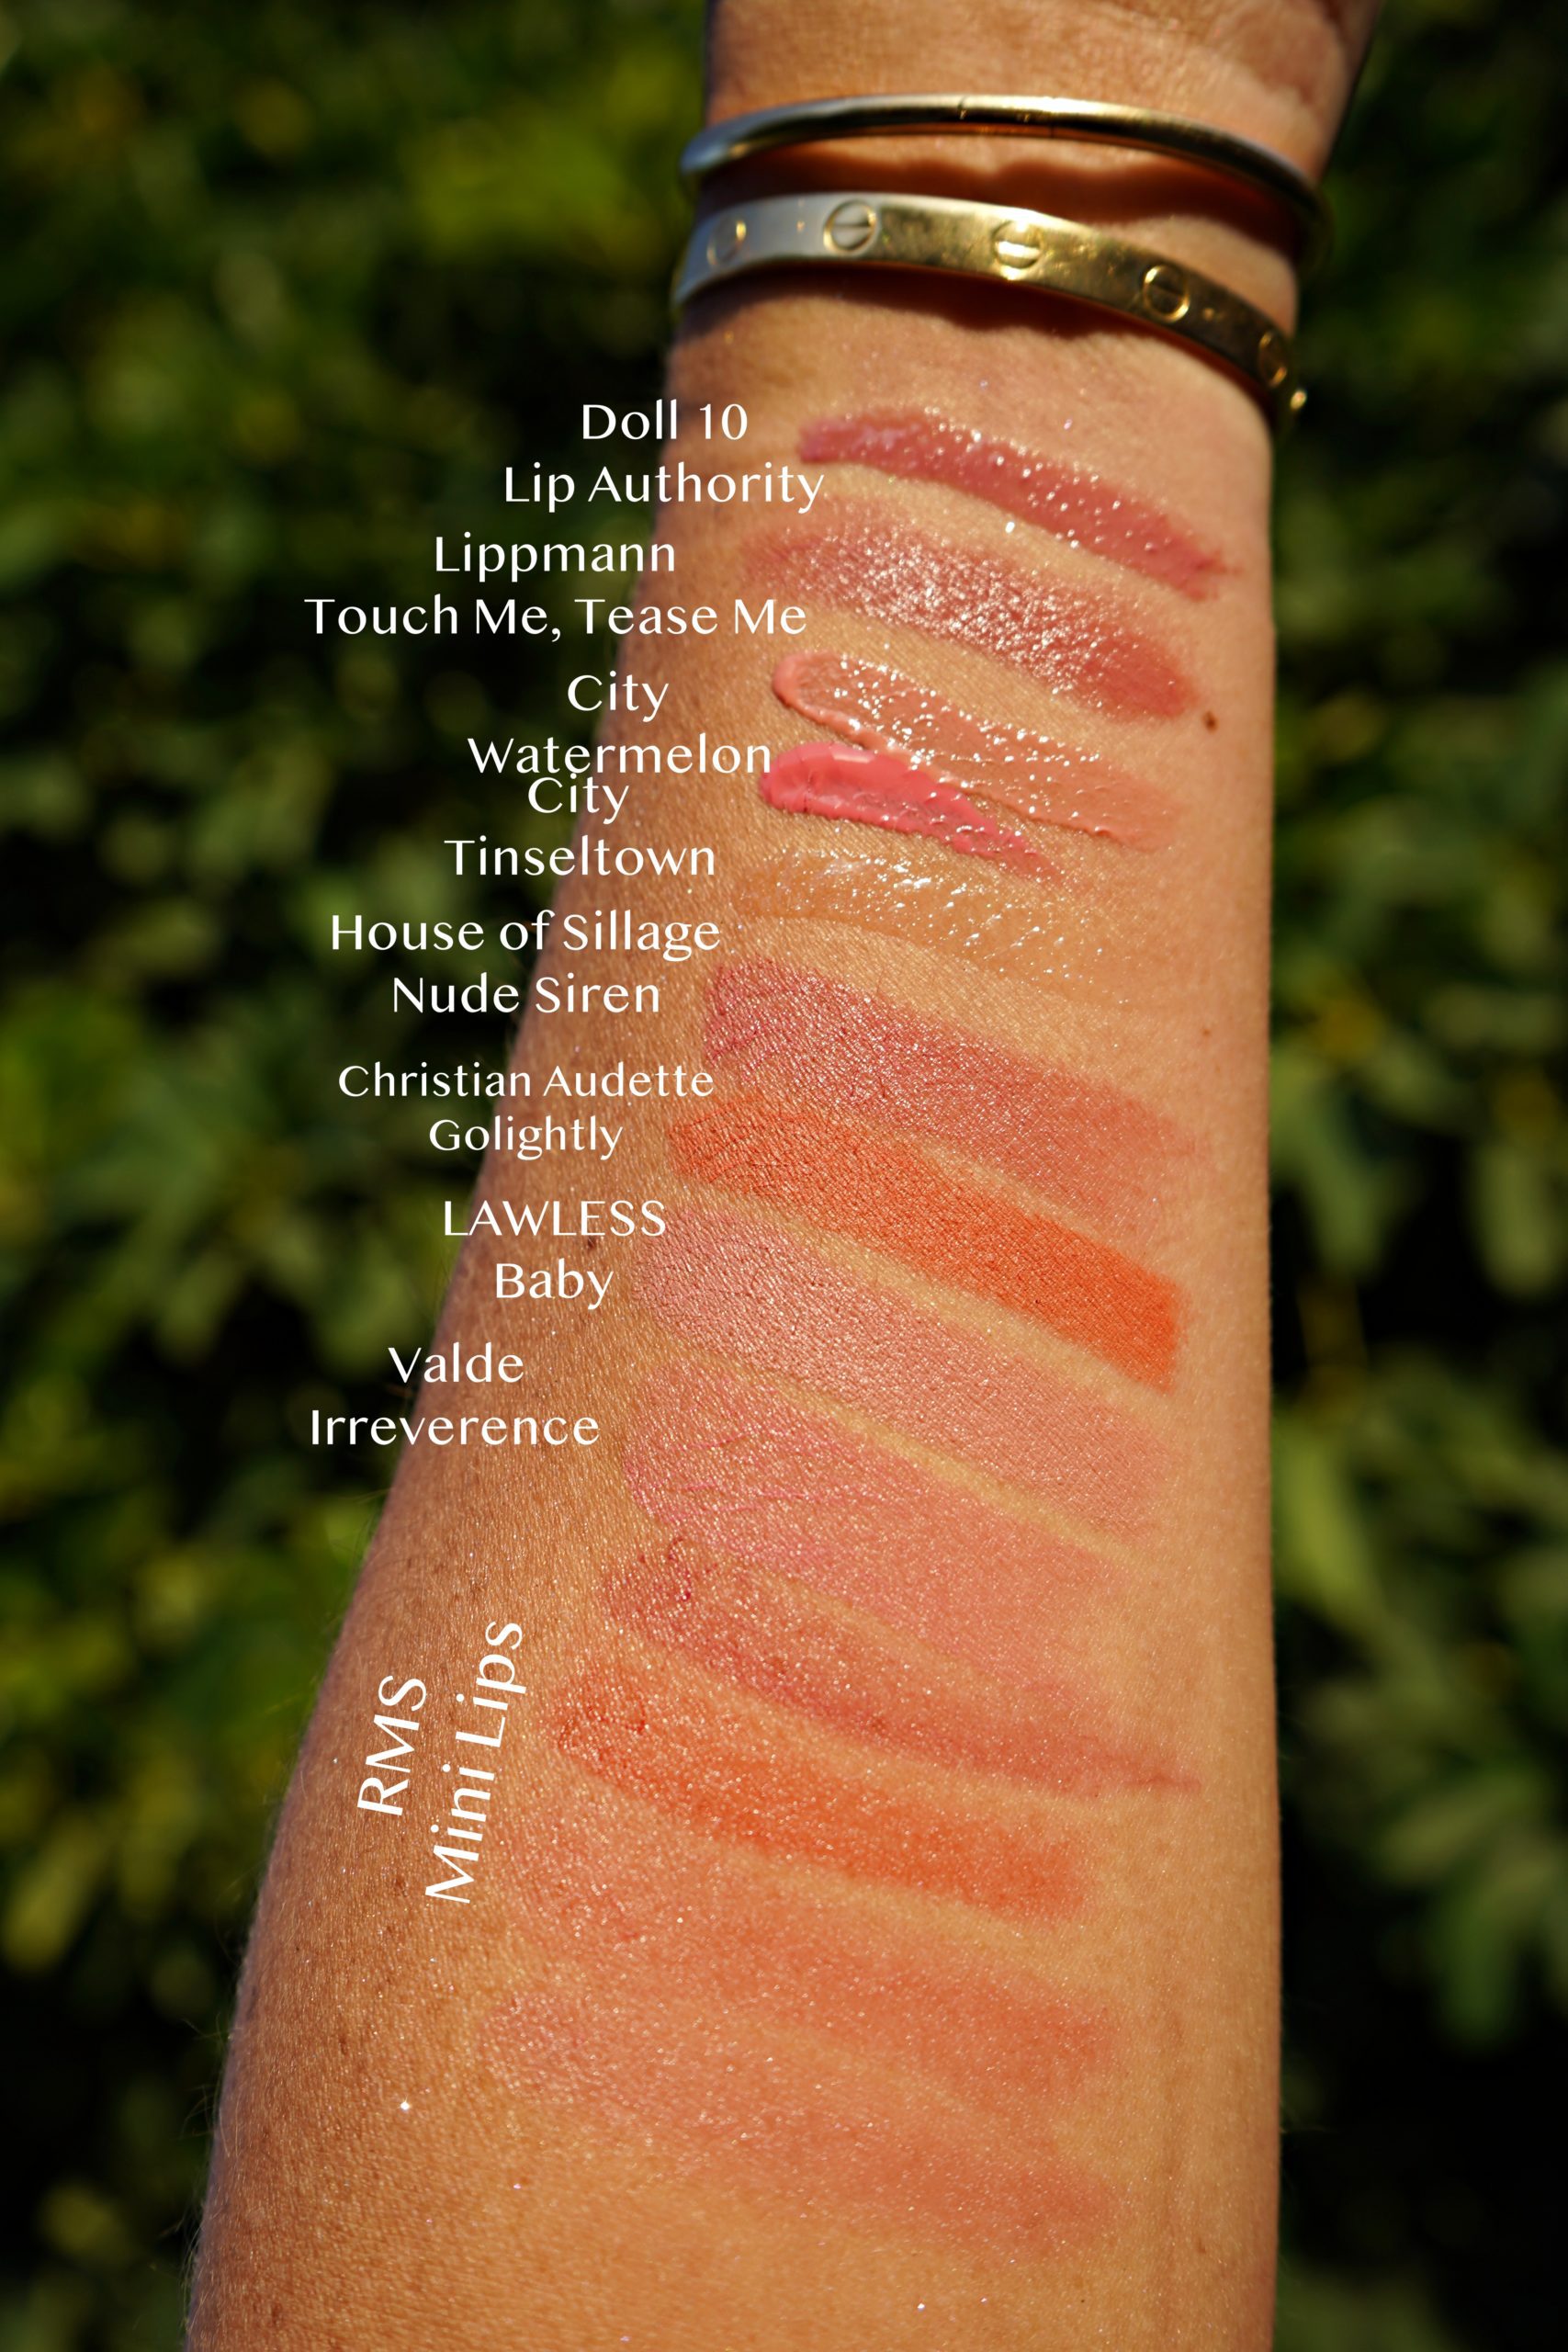 Lip product swatches